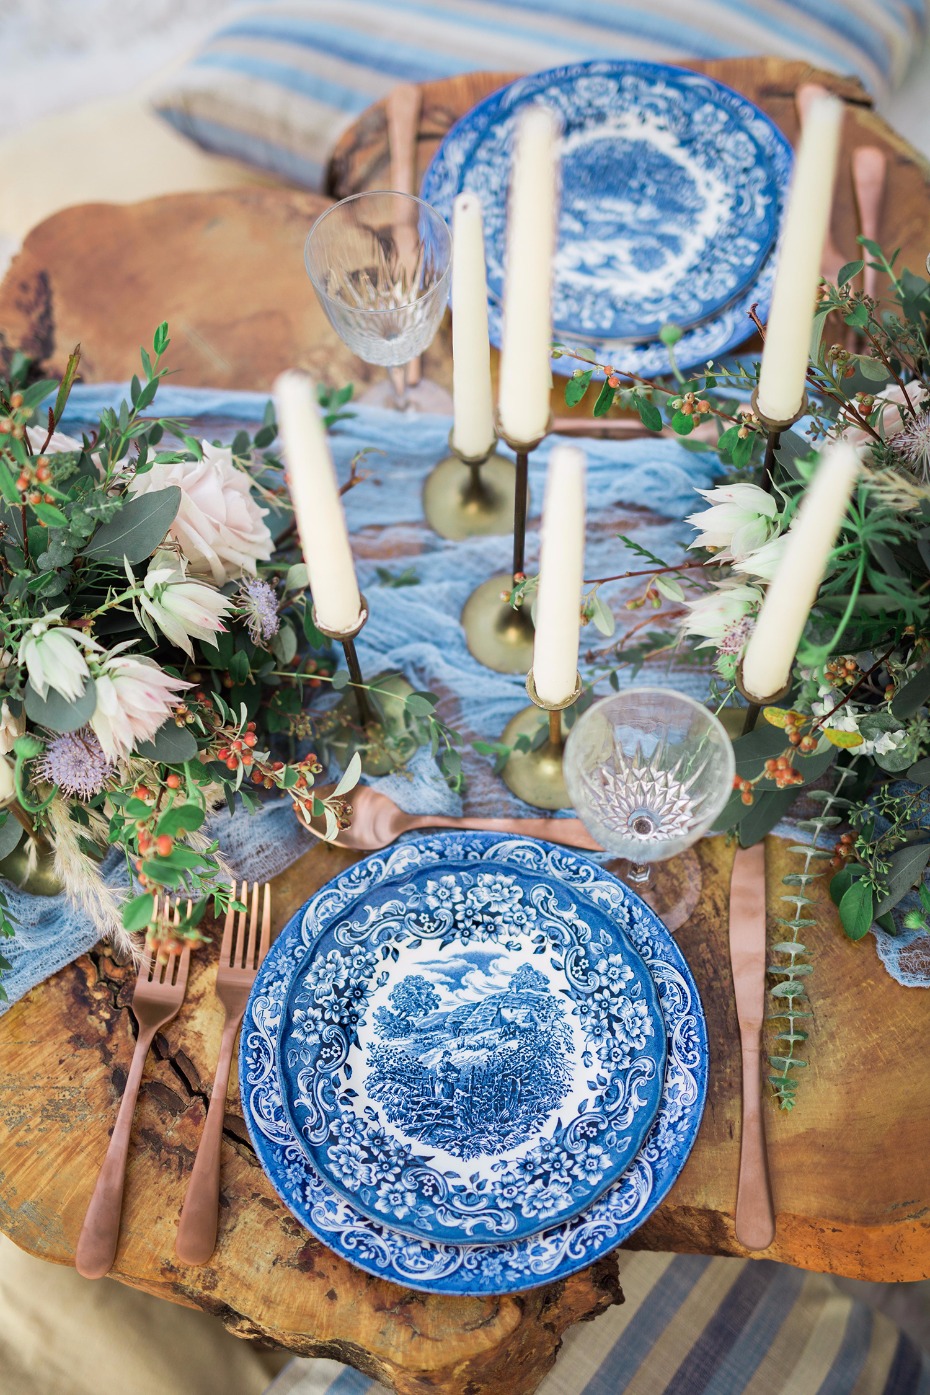 Vintage dishware for the sweetheart table